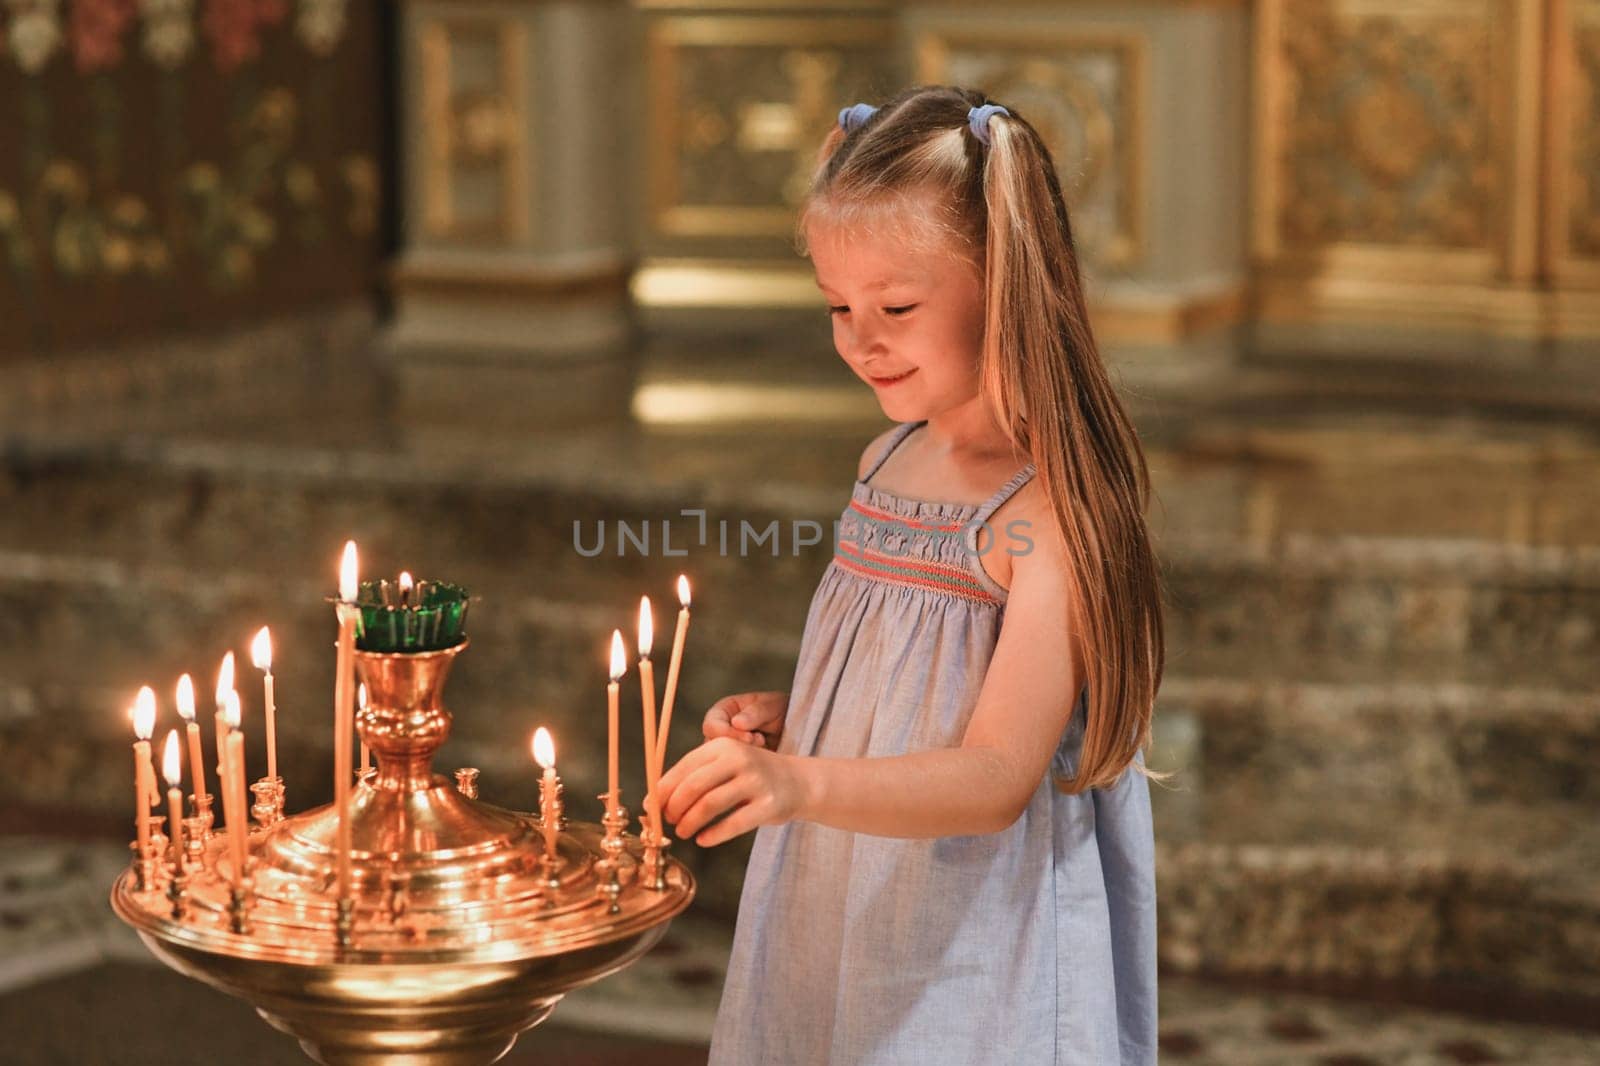 A little girl puts a candle in church. Orthodoxy by Godi